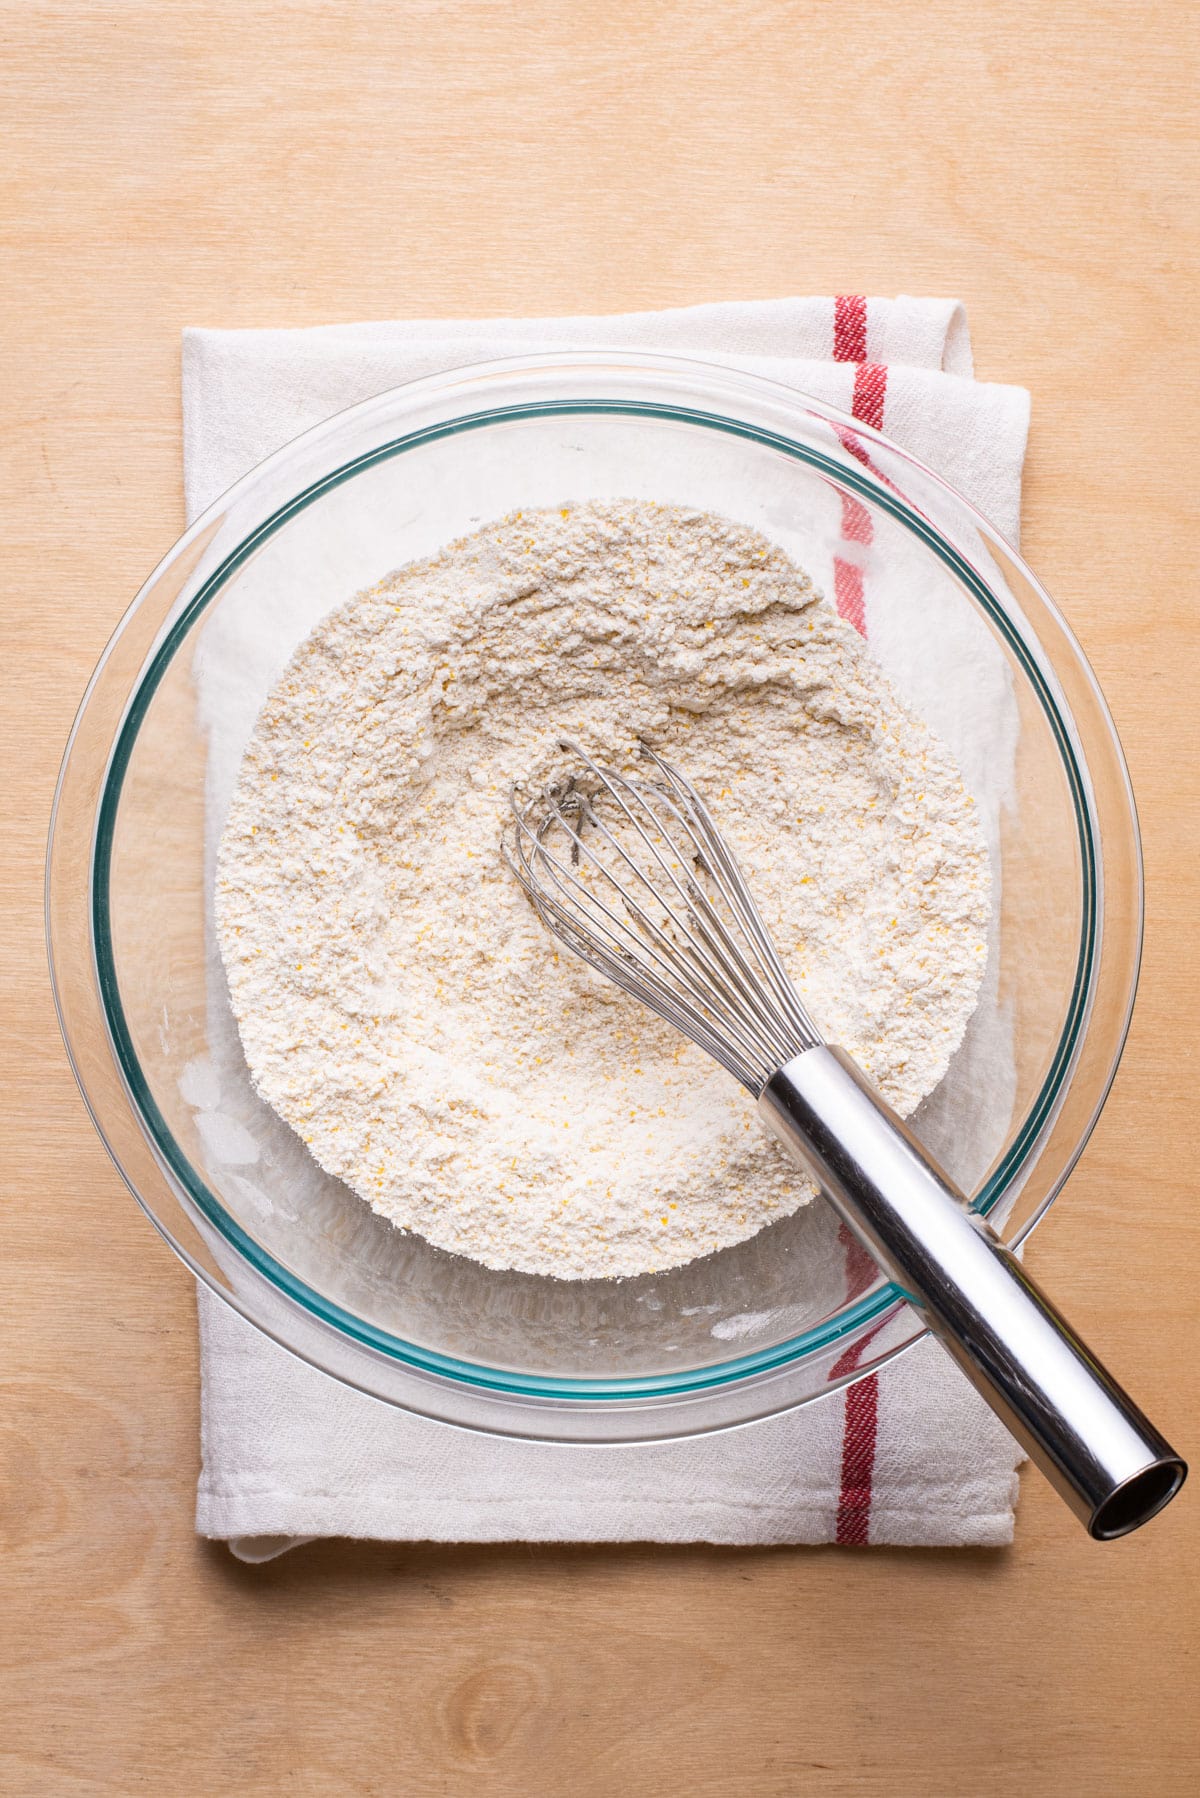 Dry ingredients for pancakes whisked together in a glass bowl.